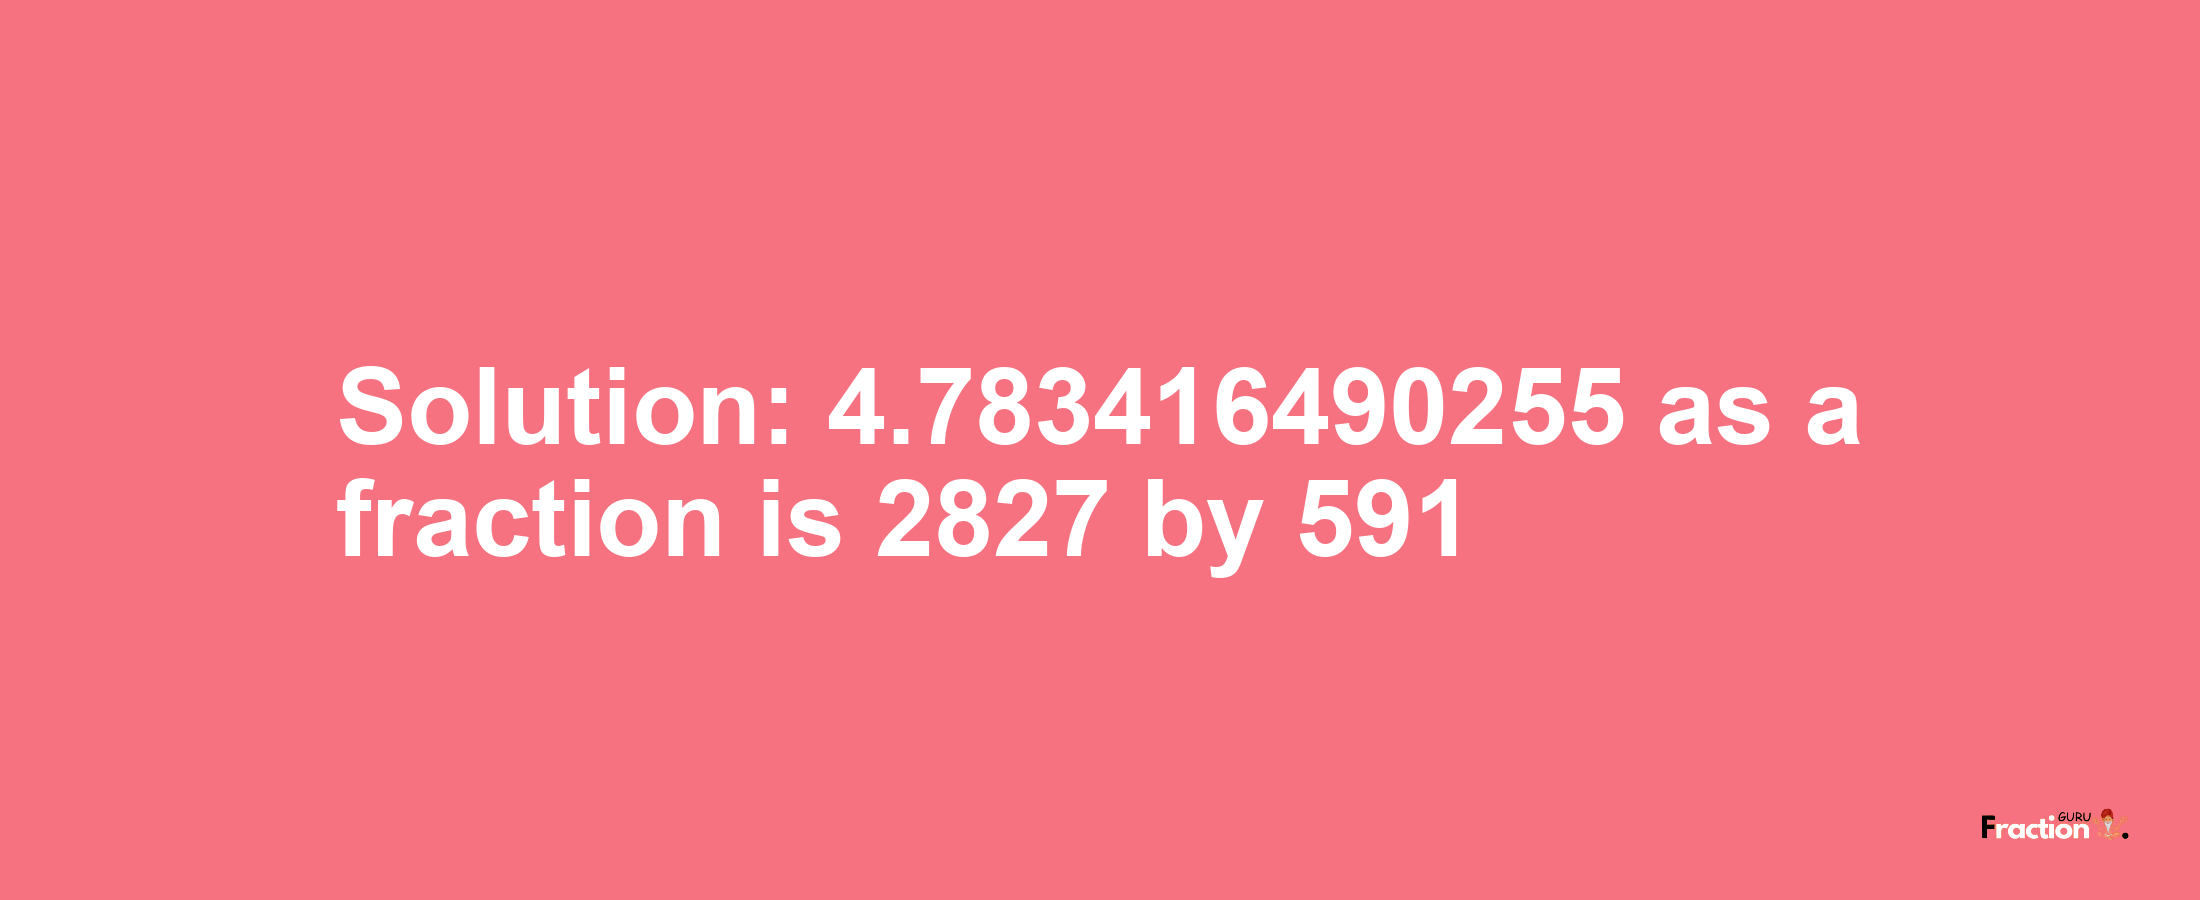 Solution:4.783416490255 as a fraction is 2827/591